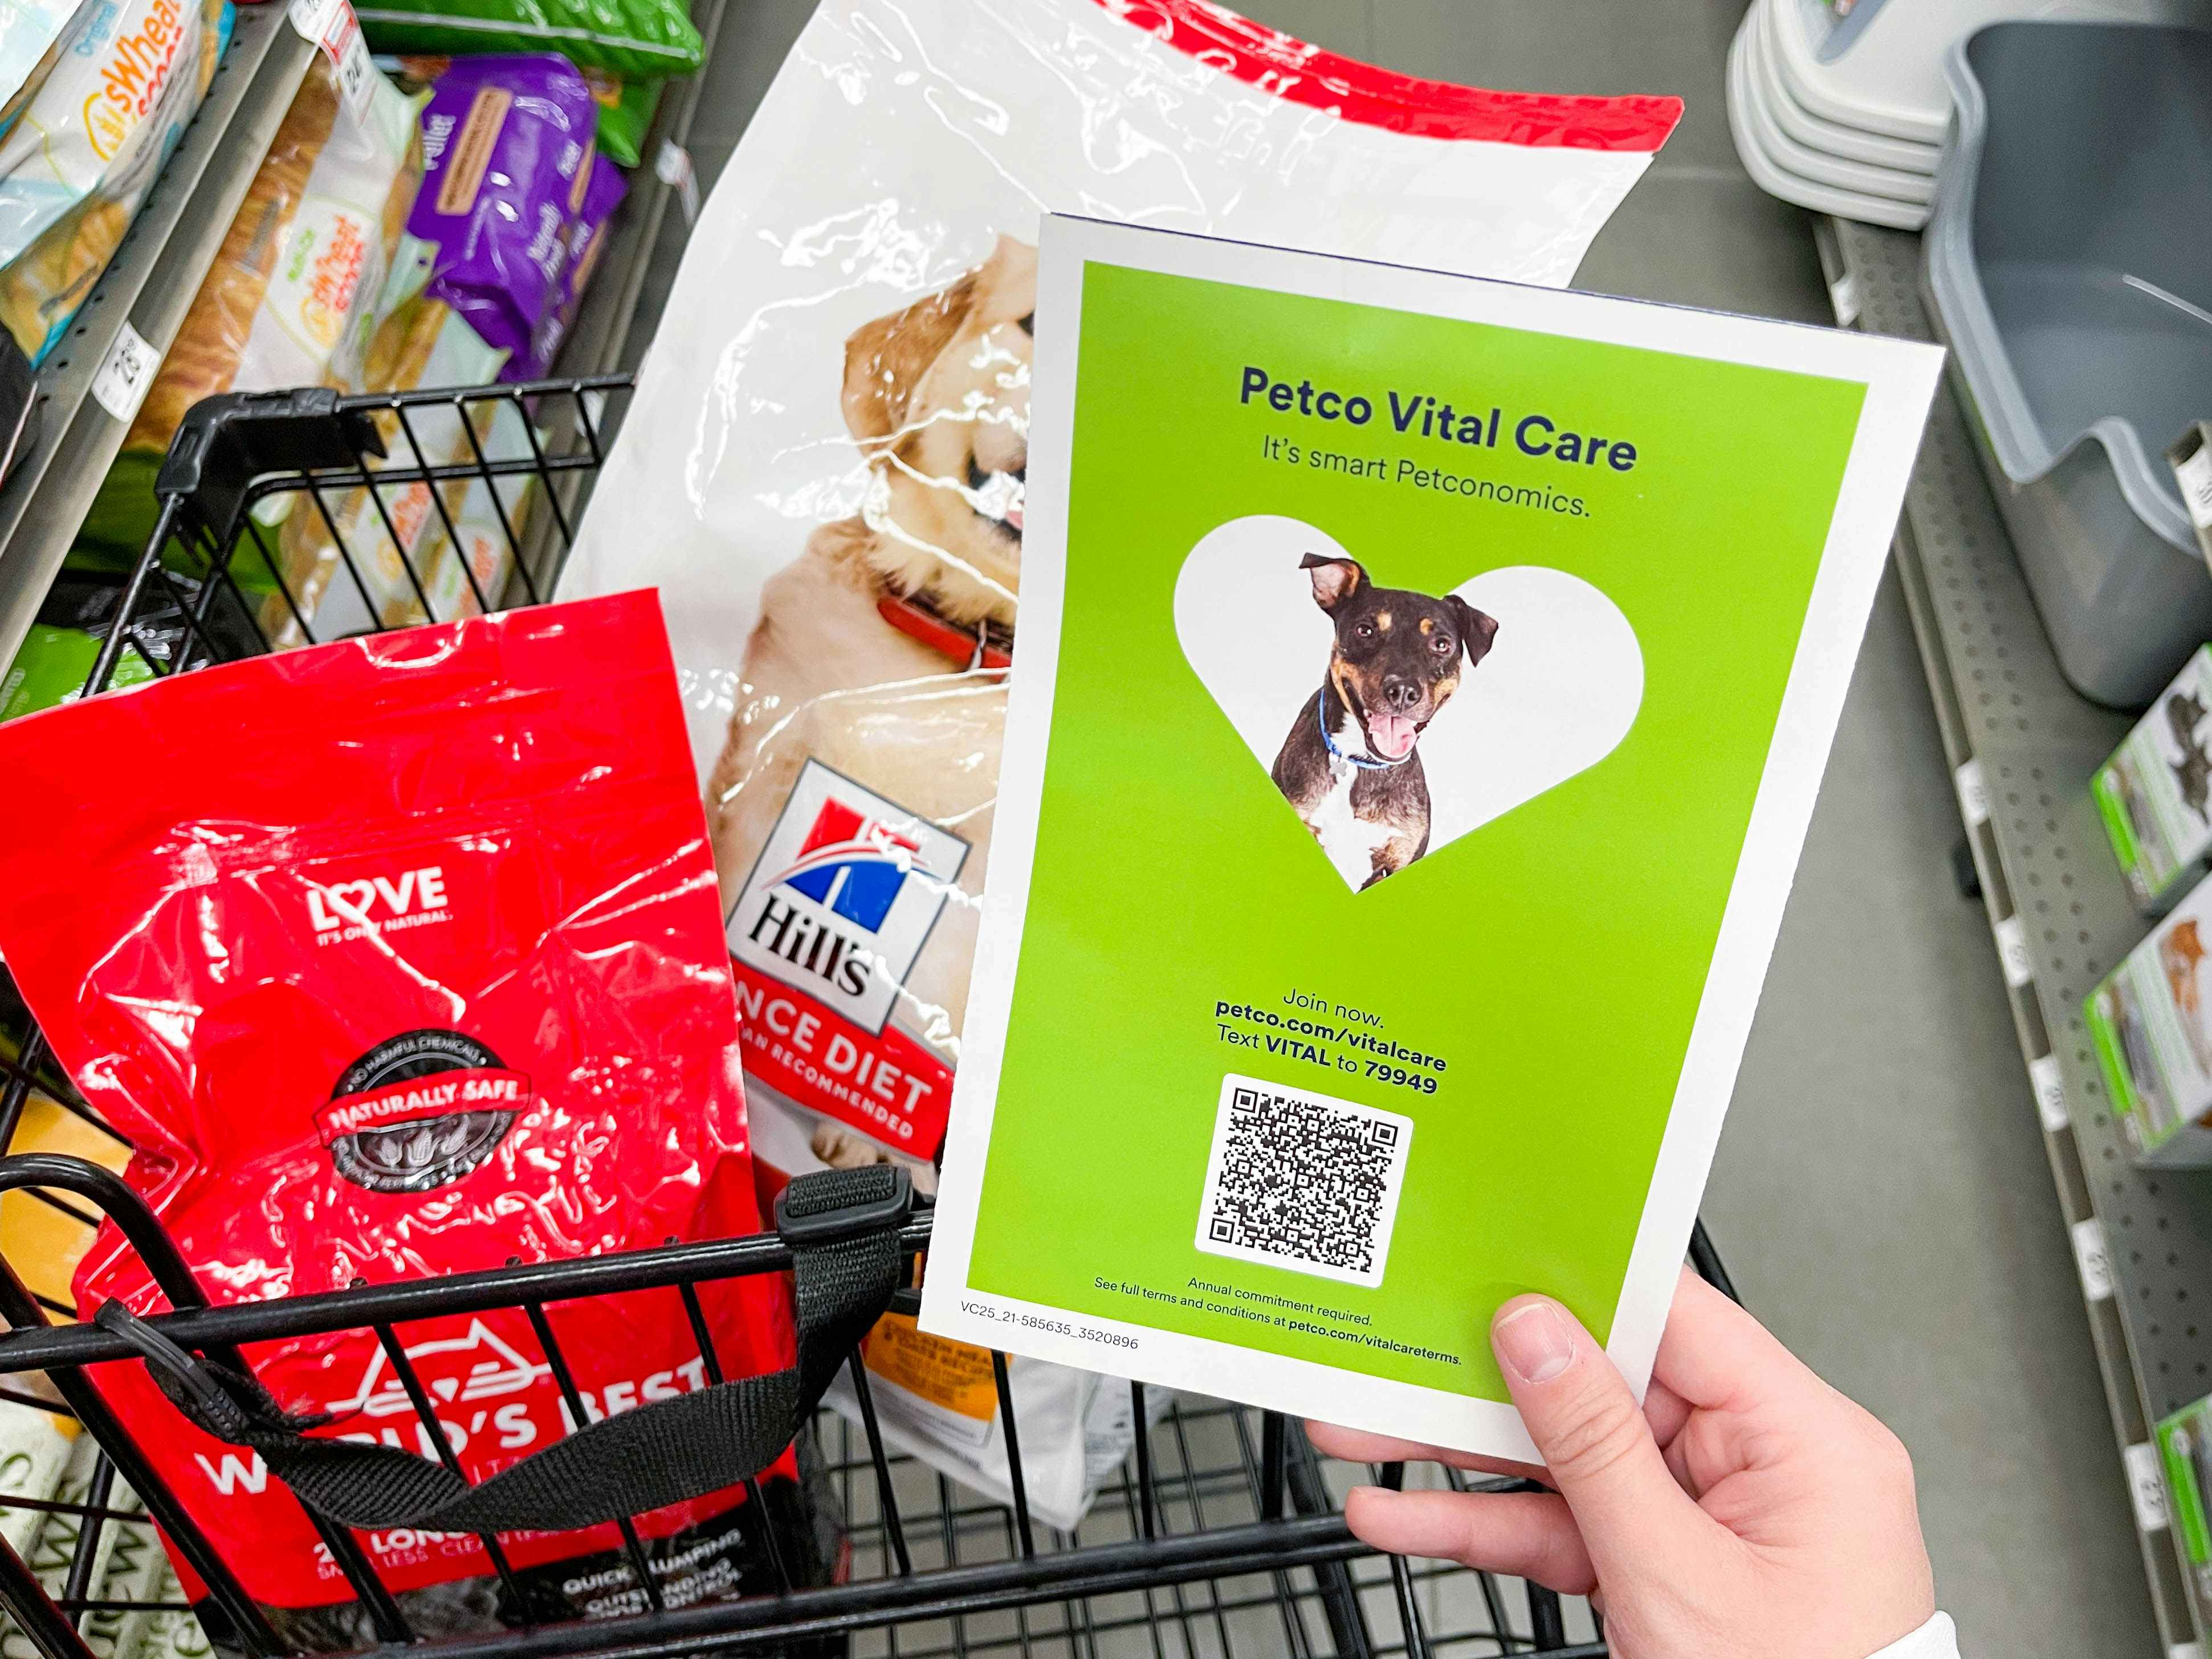 a person at at shopping cart looking at a brochure in store for petco vital care 